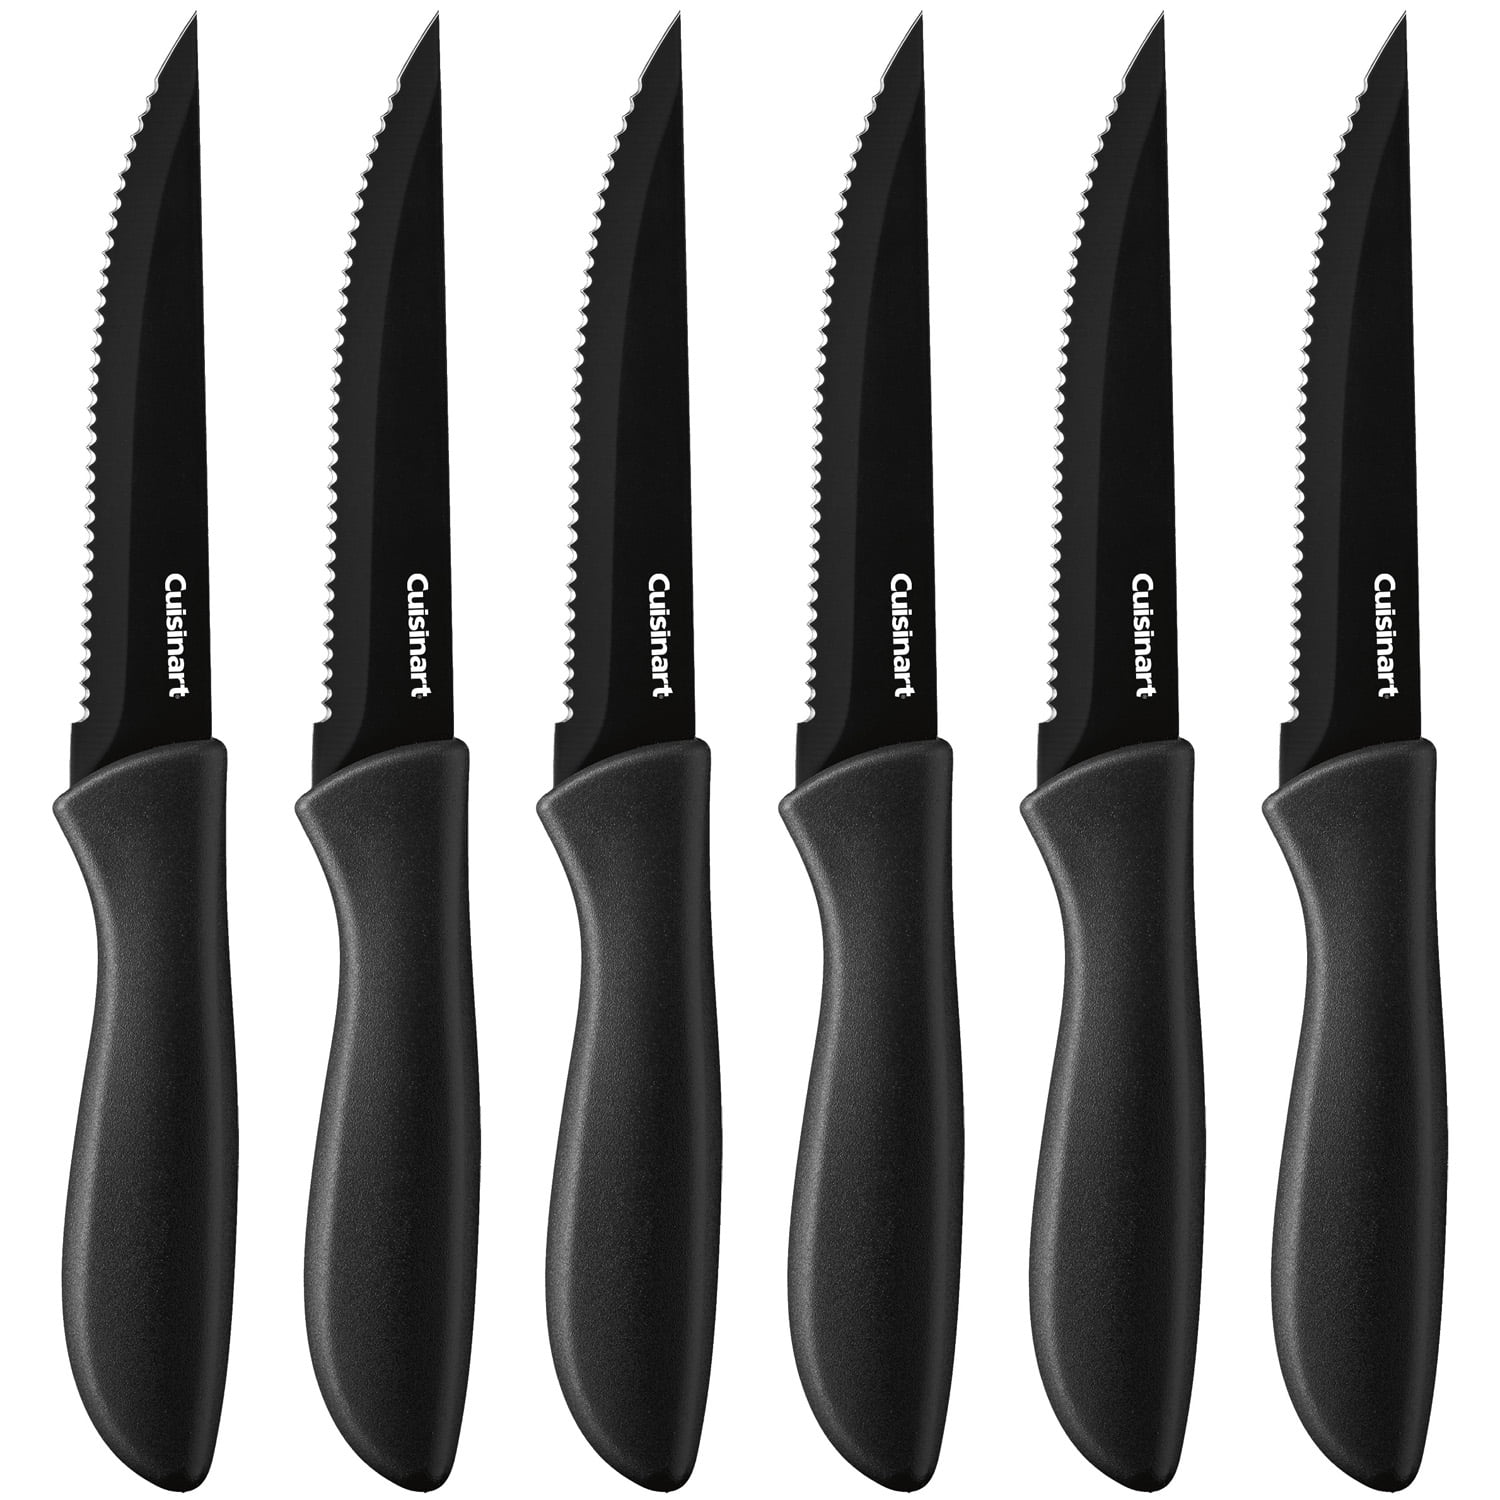 Cuisinart Set of 6 Stainless Steel Color BandKnives w/ Guard 